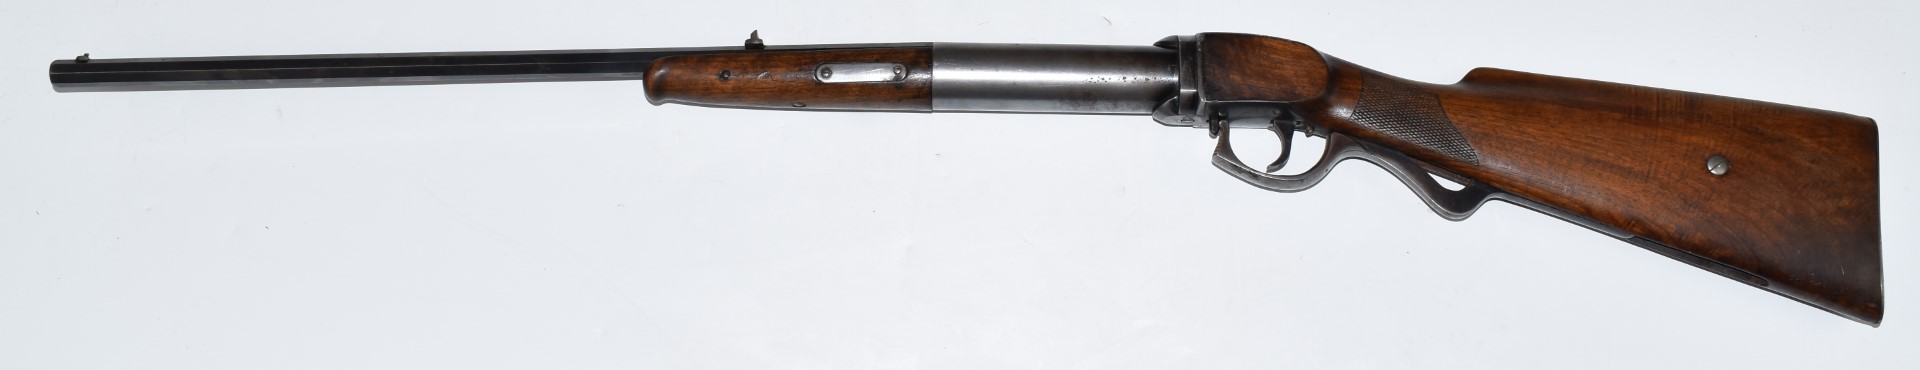 Oscar Will Bugelspanner .177 underlever air rifle with chequered grip, metal butt plate, - Image 8 of 8